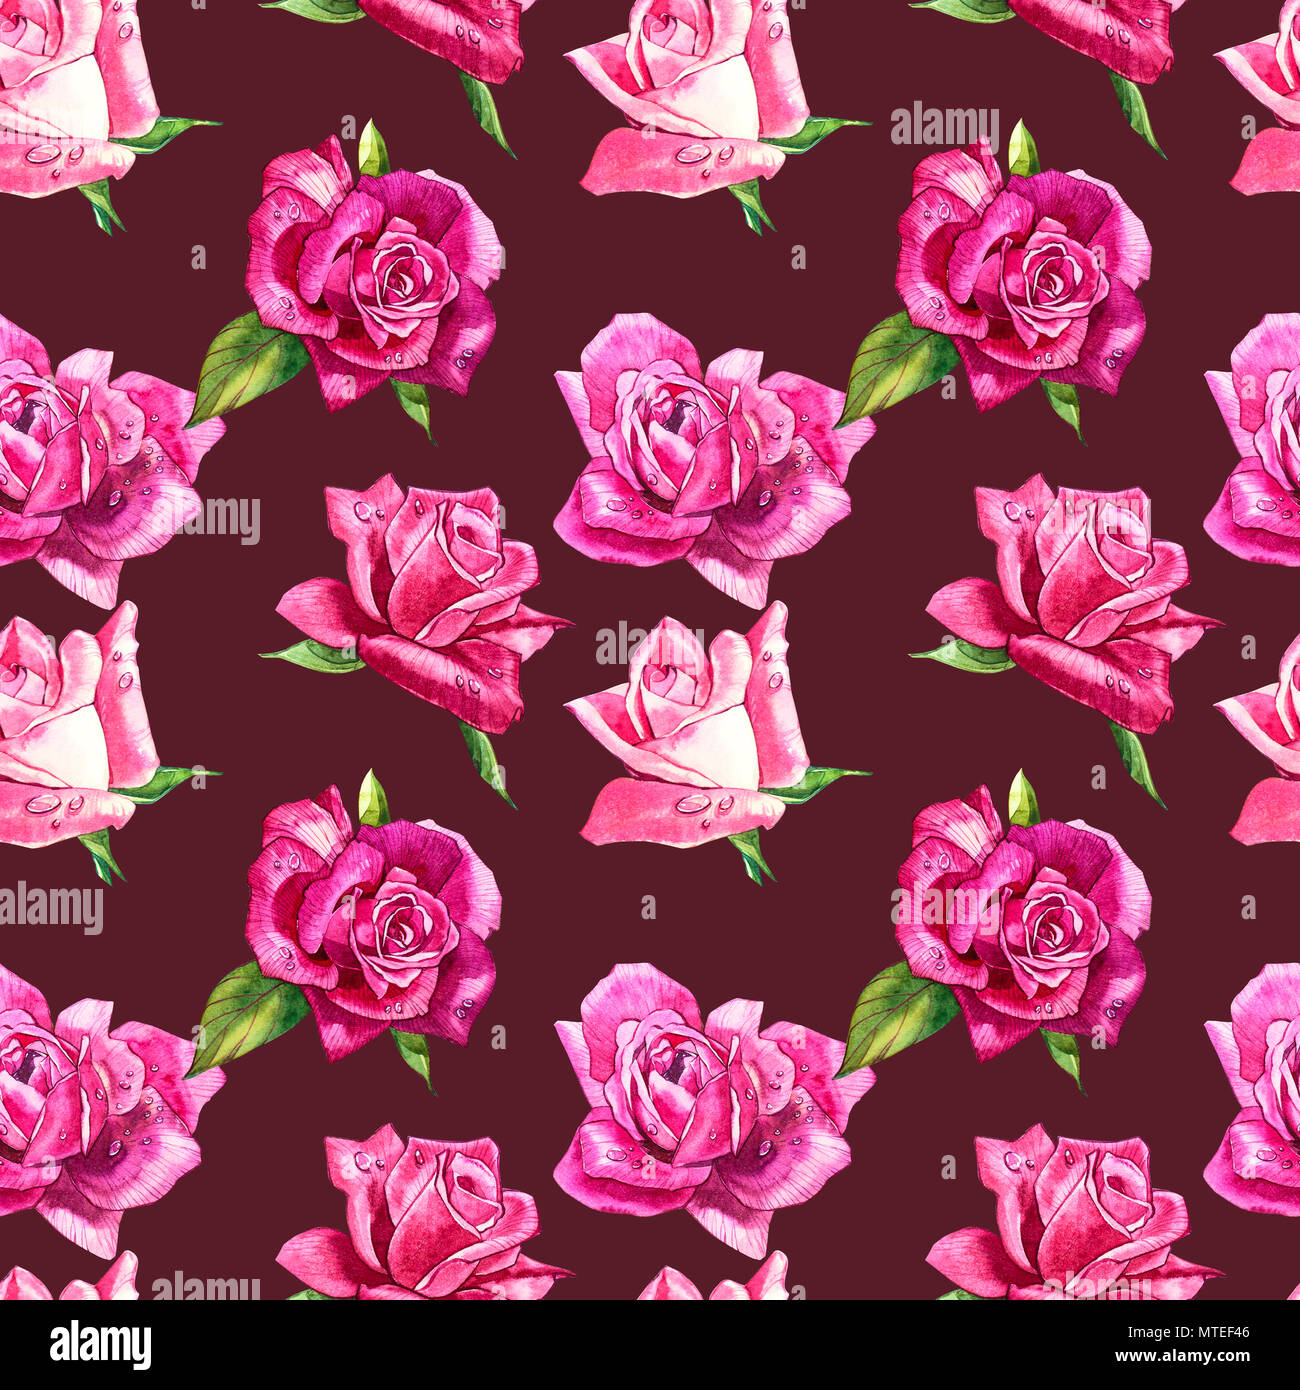 Natural pink roses background. Seamless pattern of red and pink roses ...